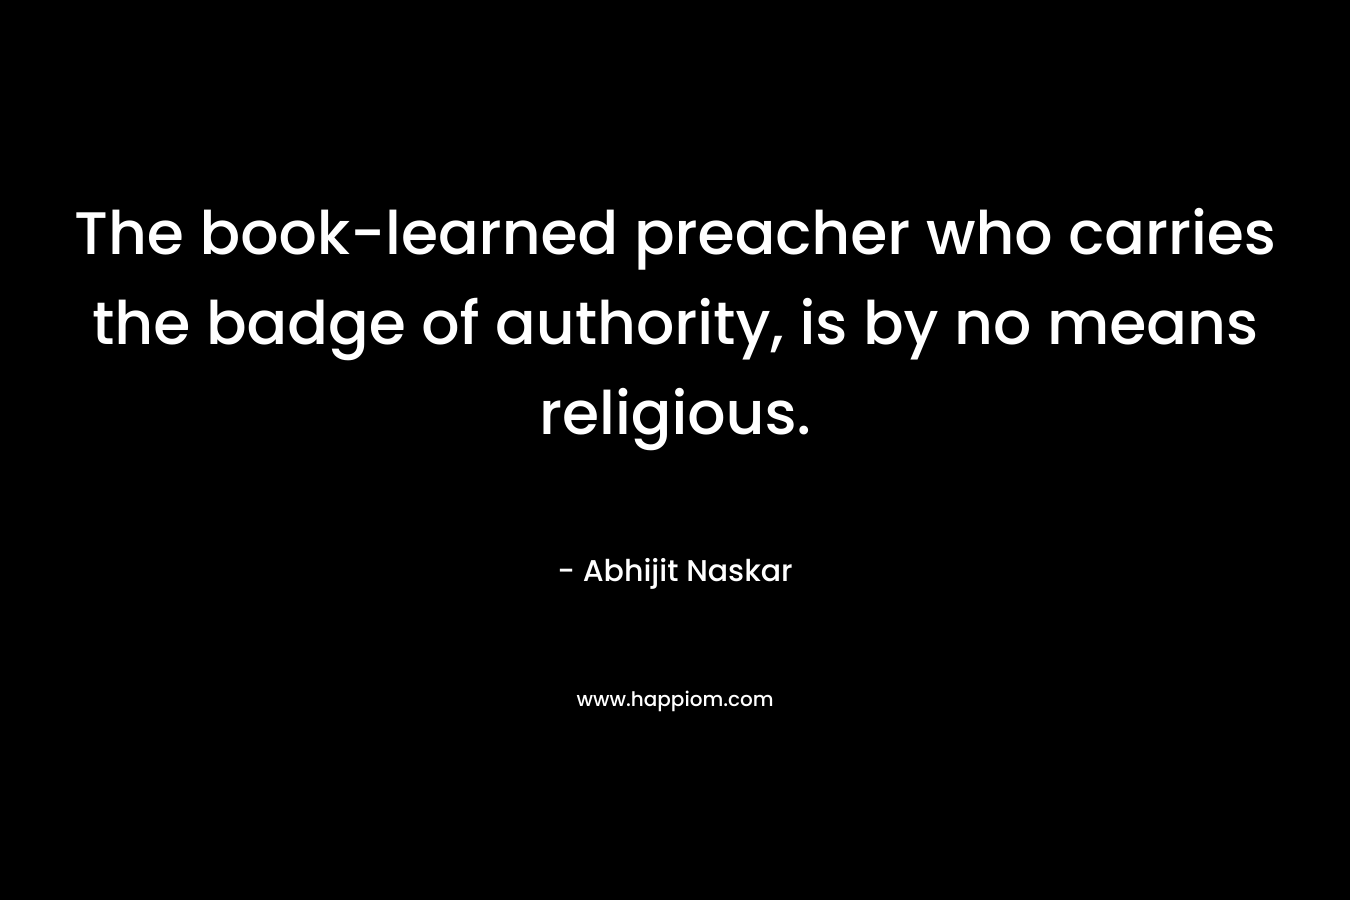 The book-learned preacher who carries the badge of authority, is by no means religious. – Abhijit Naskar